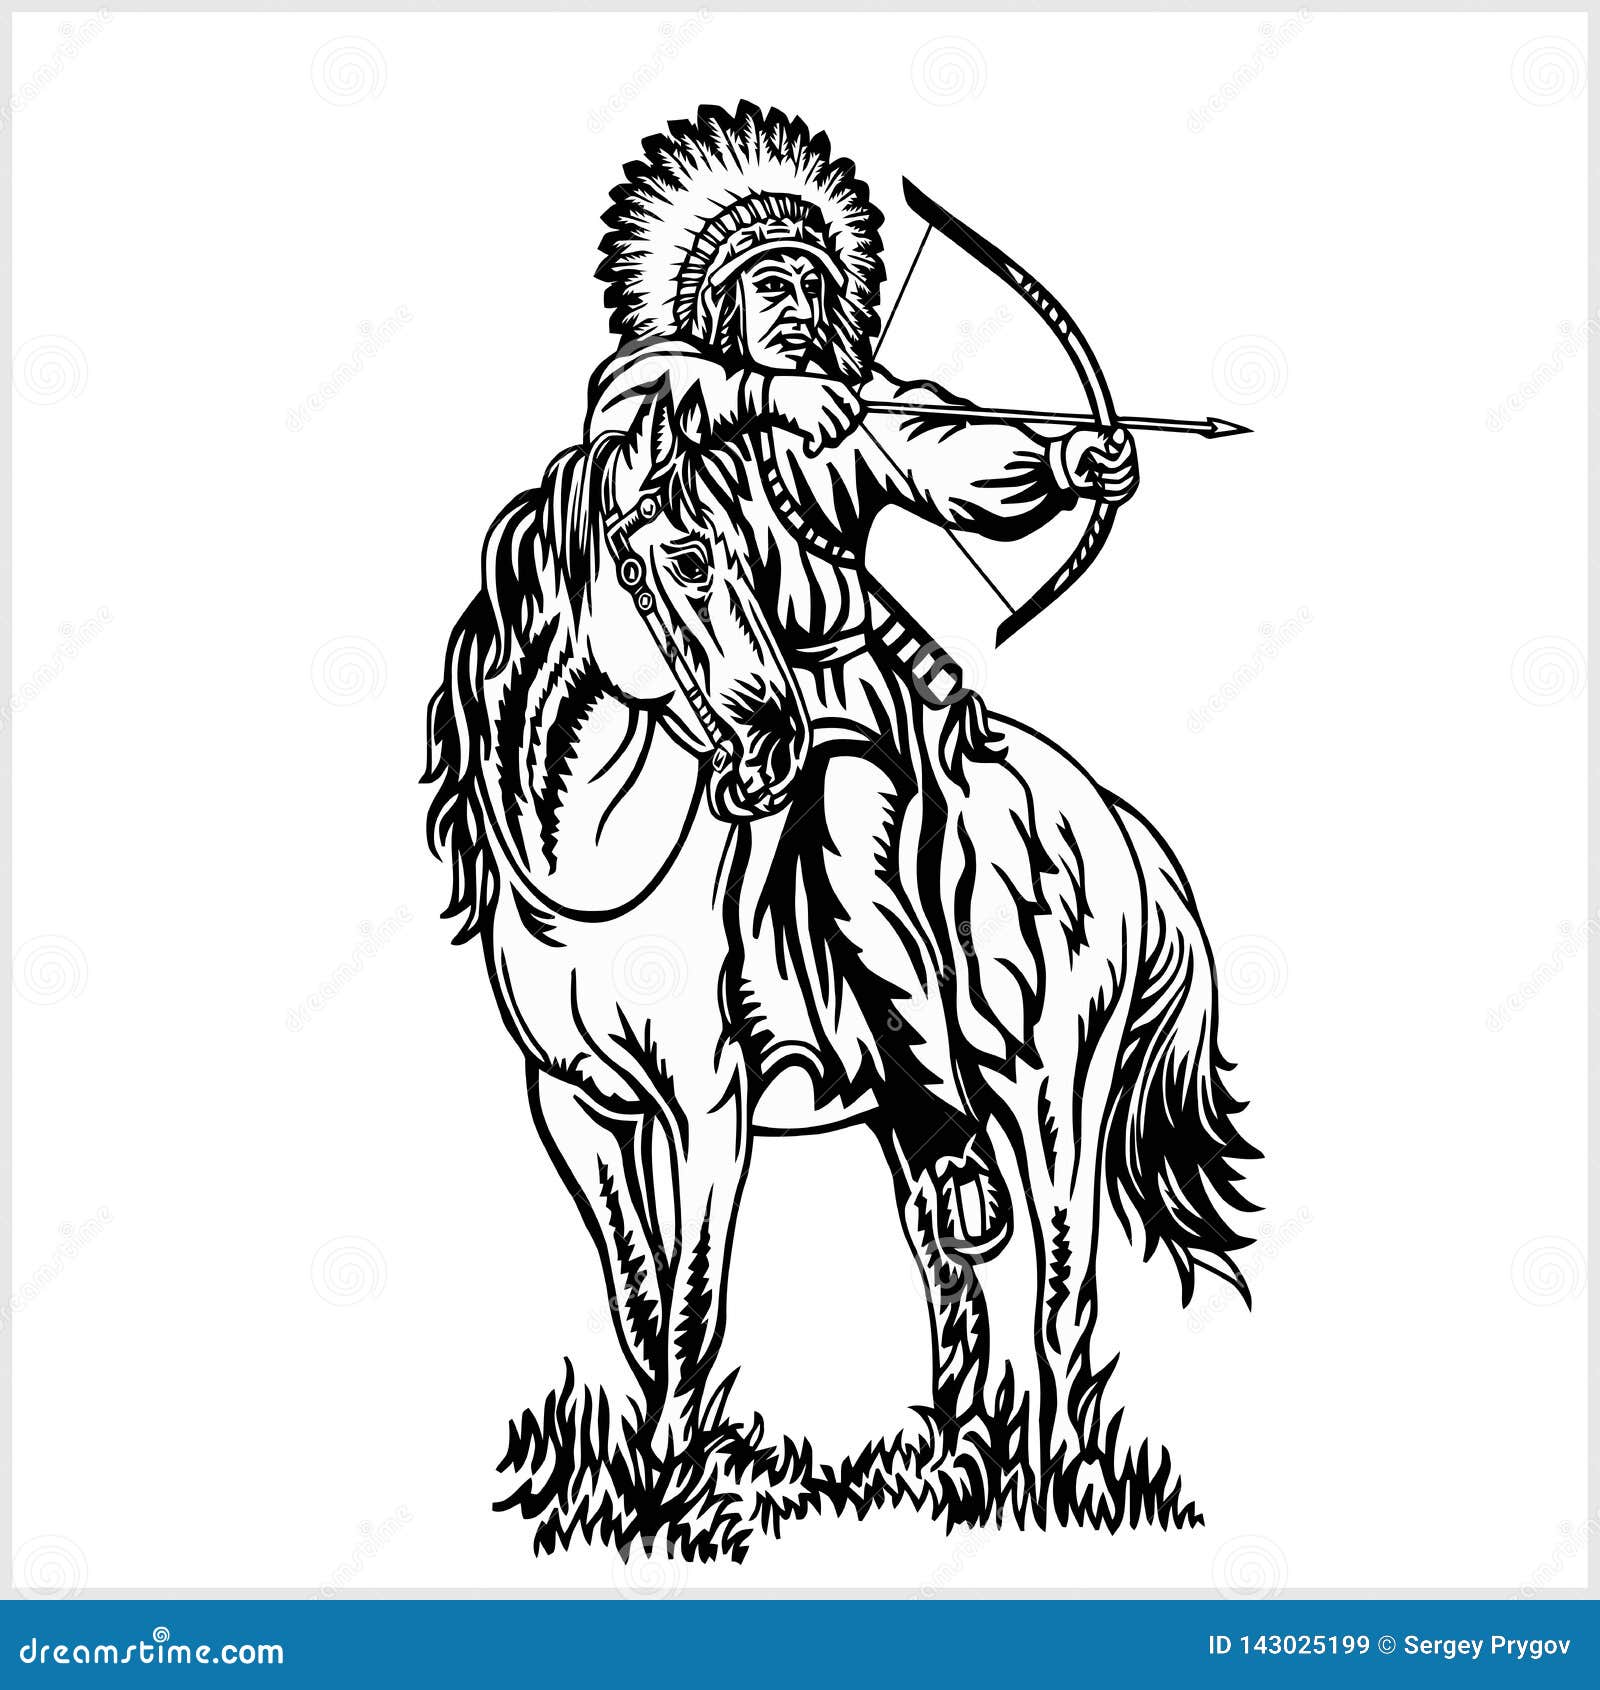 native american - rider on horse.